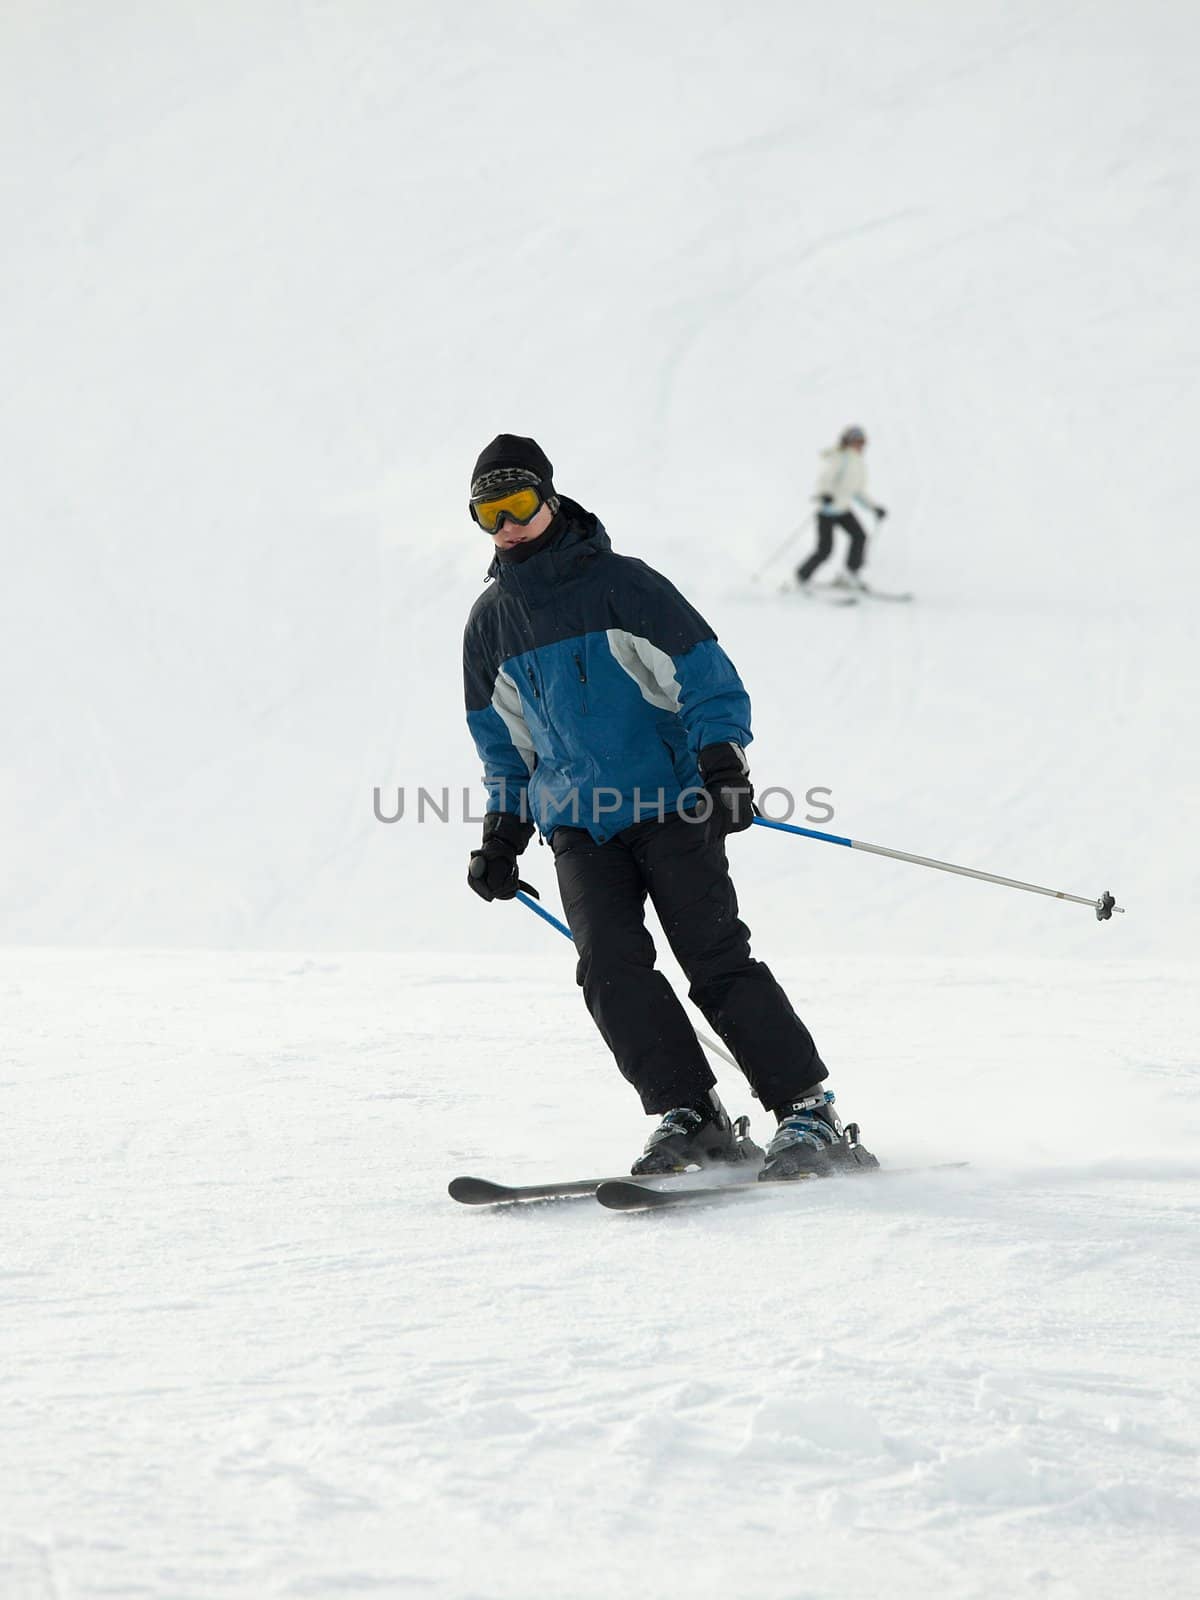 Skier coming down the slope